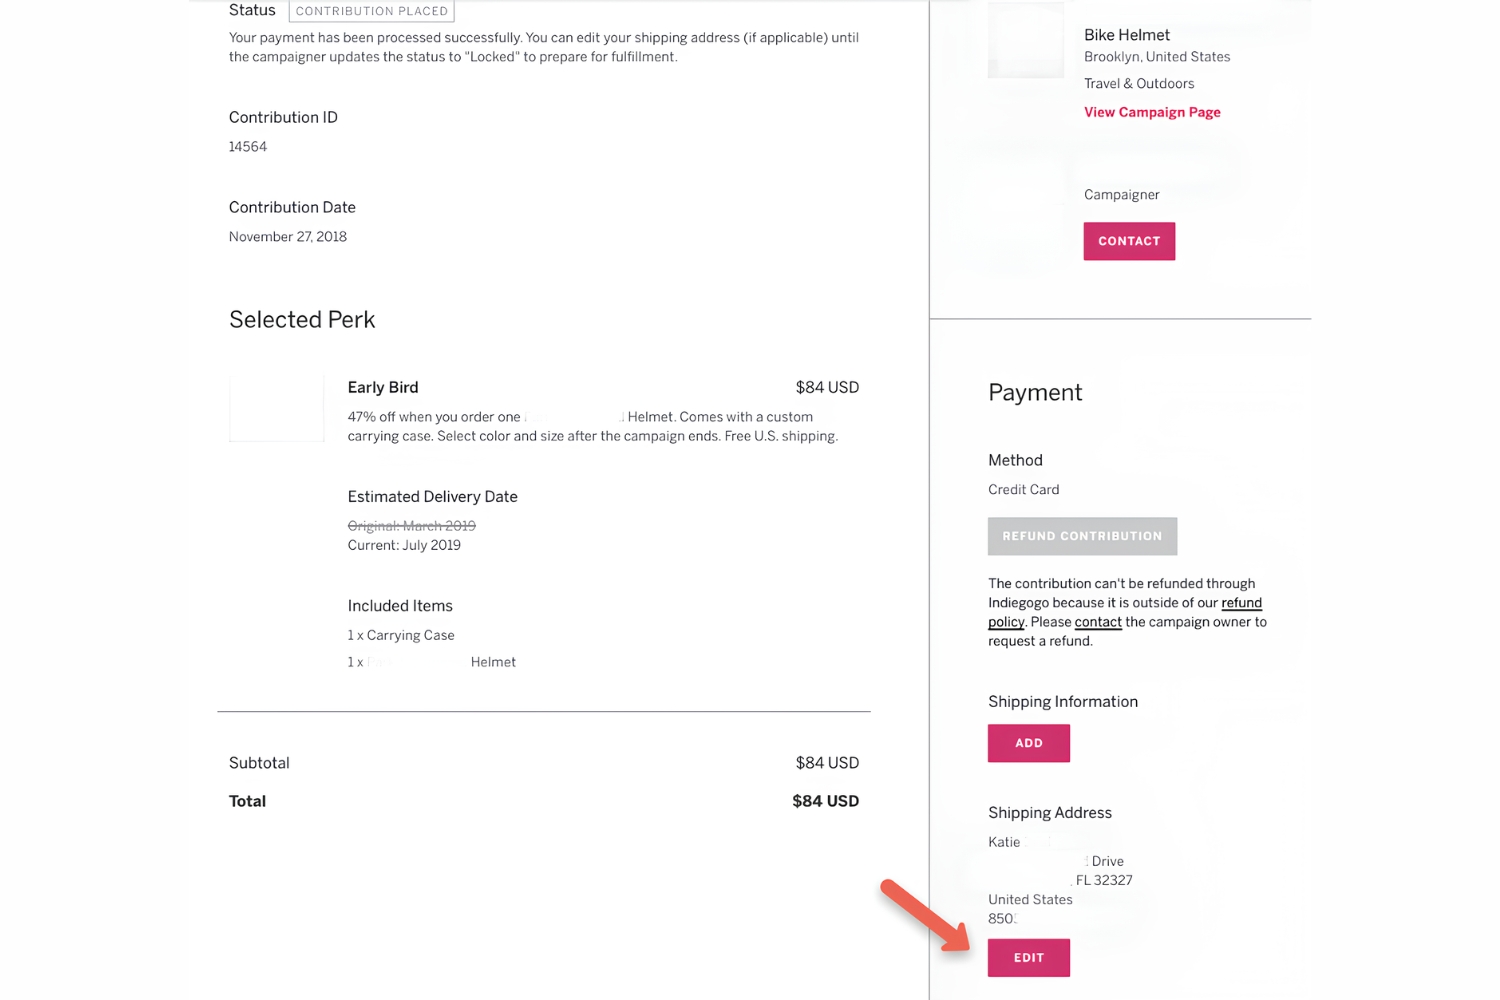 How To Update Your Shipping Address On Indiegogo